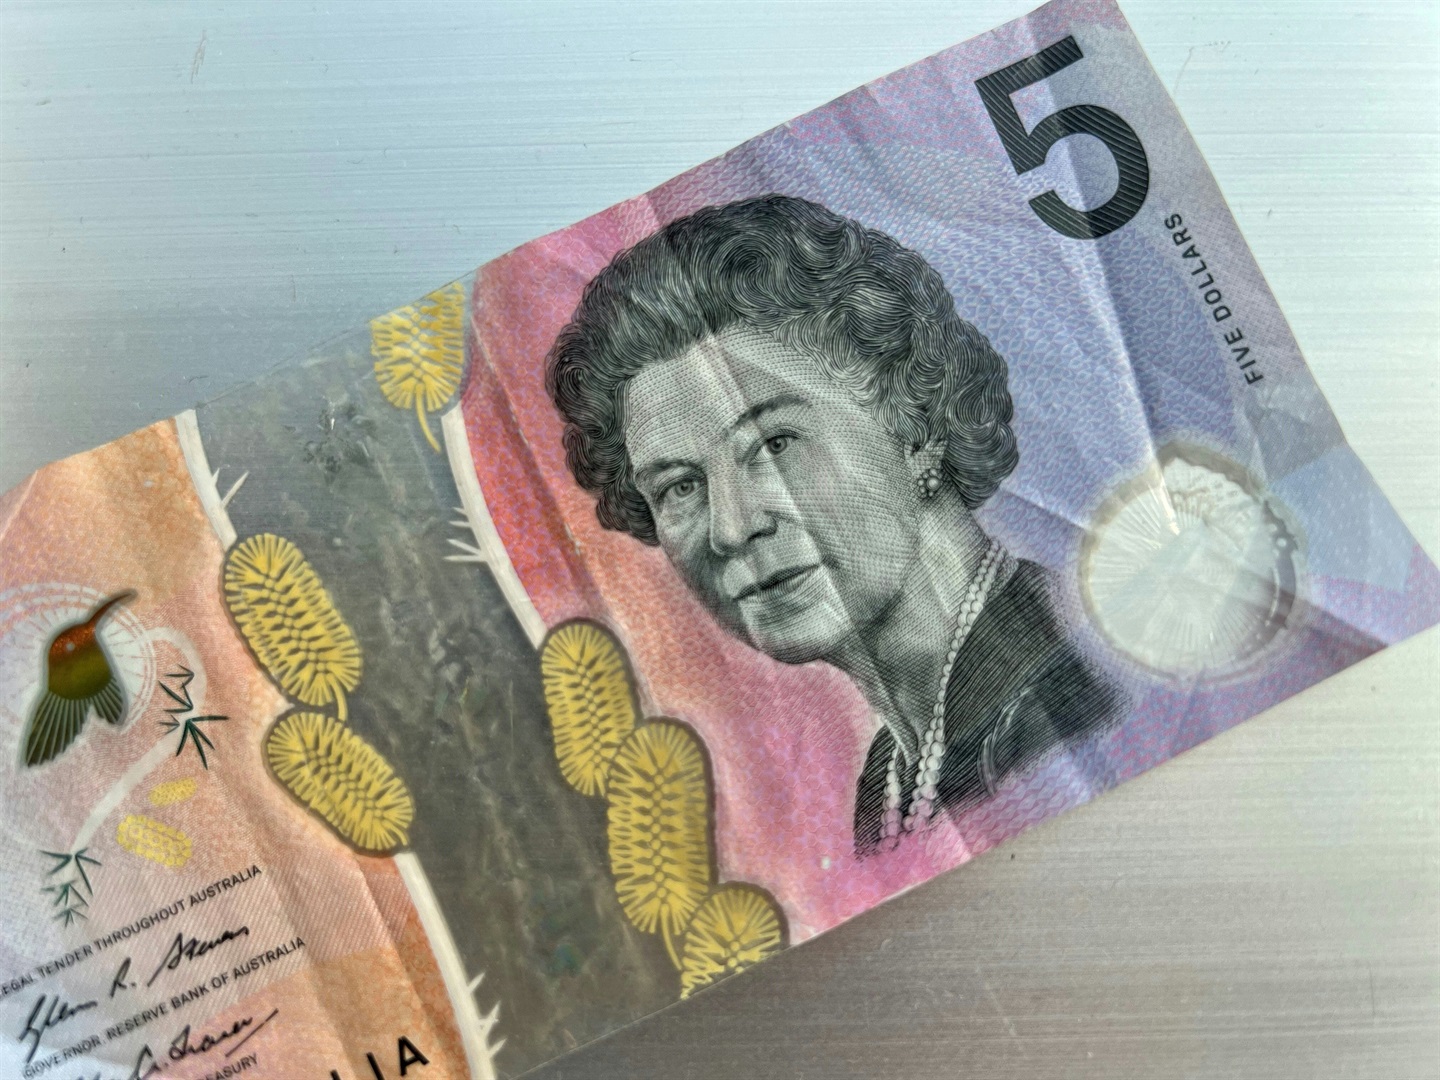 Businessinsider.co.za | Australia won't put King Charles on new $5 bill, instead opting for a design honoring Indigenous people